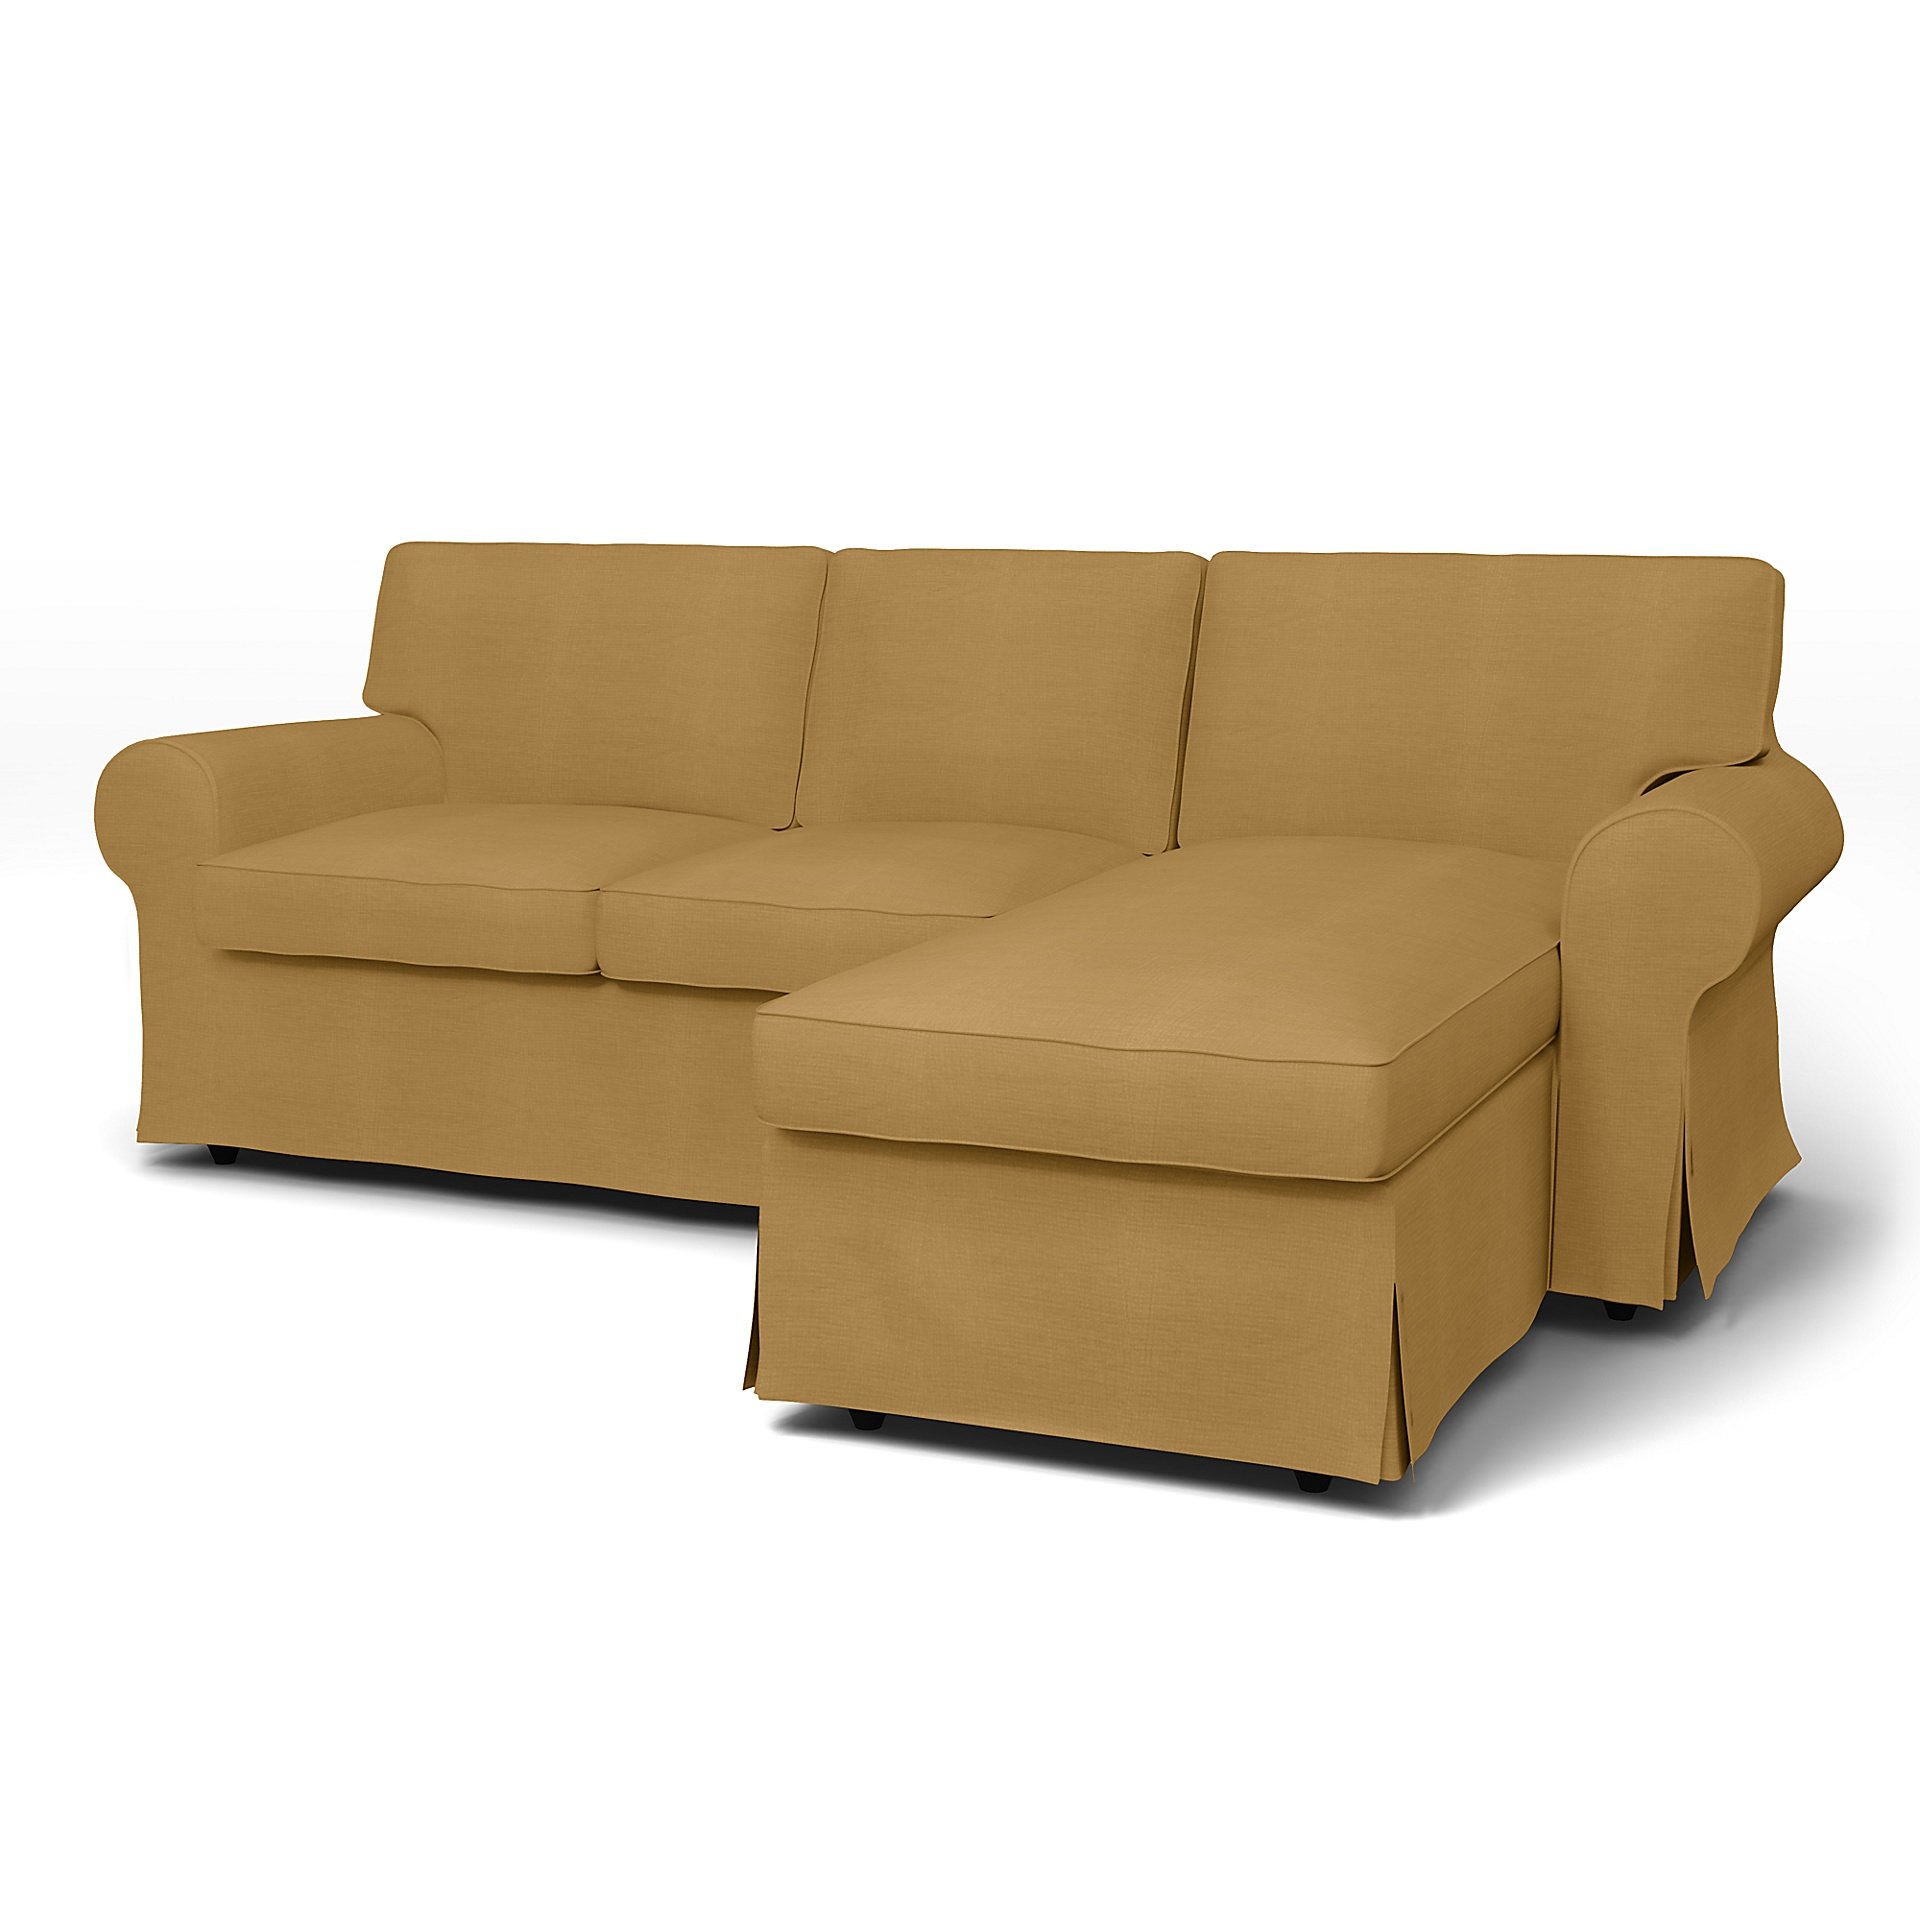 IKEA - Ektorp 3 Seater Sofa with Chaise Cover, Dusty Yellow, Linen - Bemz